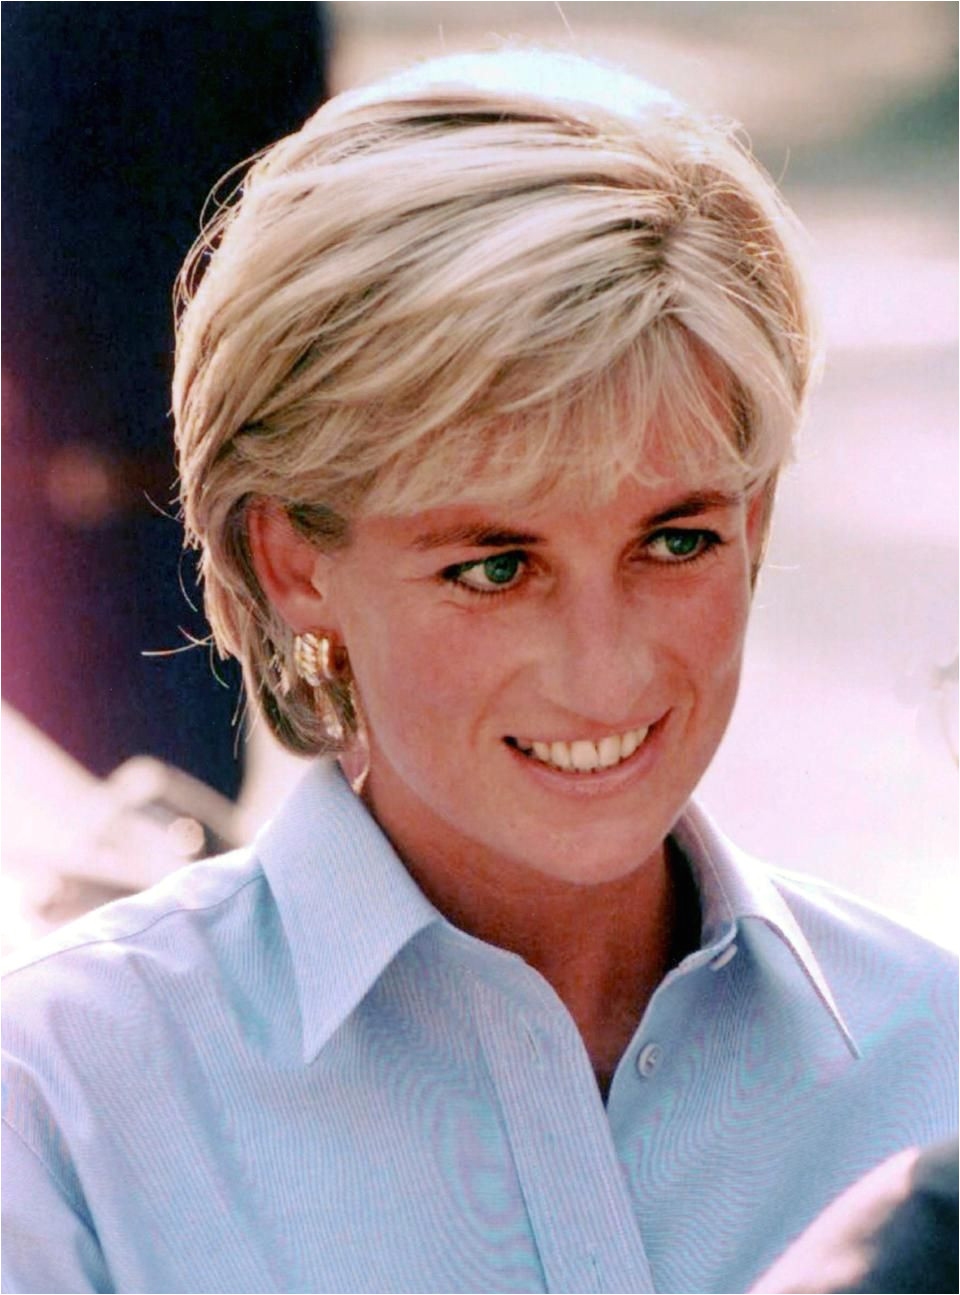 Diana in Bosnia July 1997 in the last photo Arthur took of her Princesa